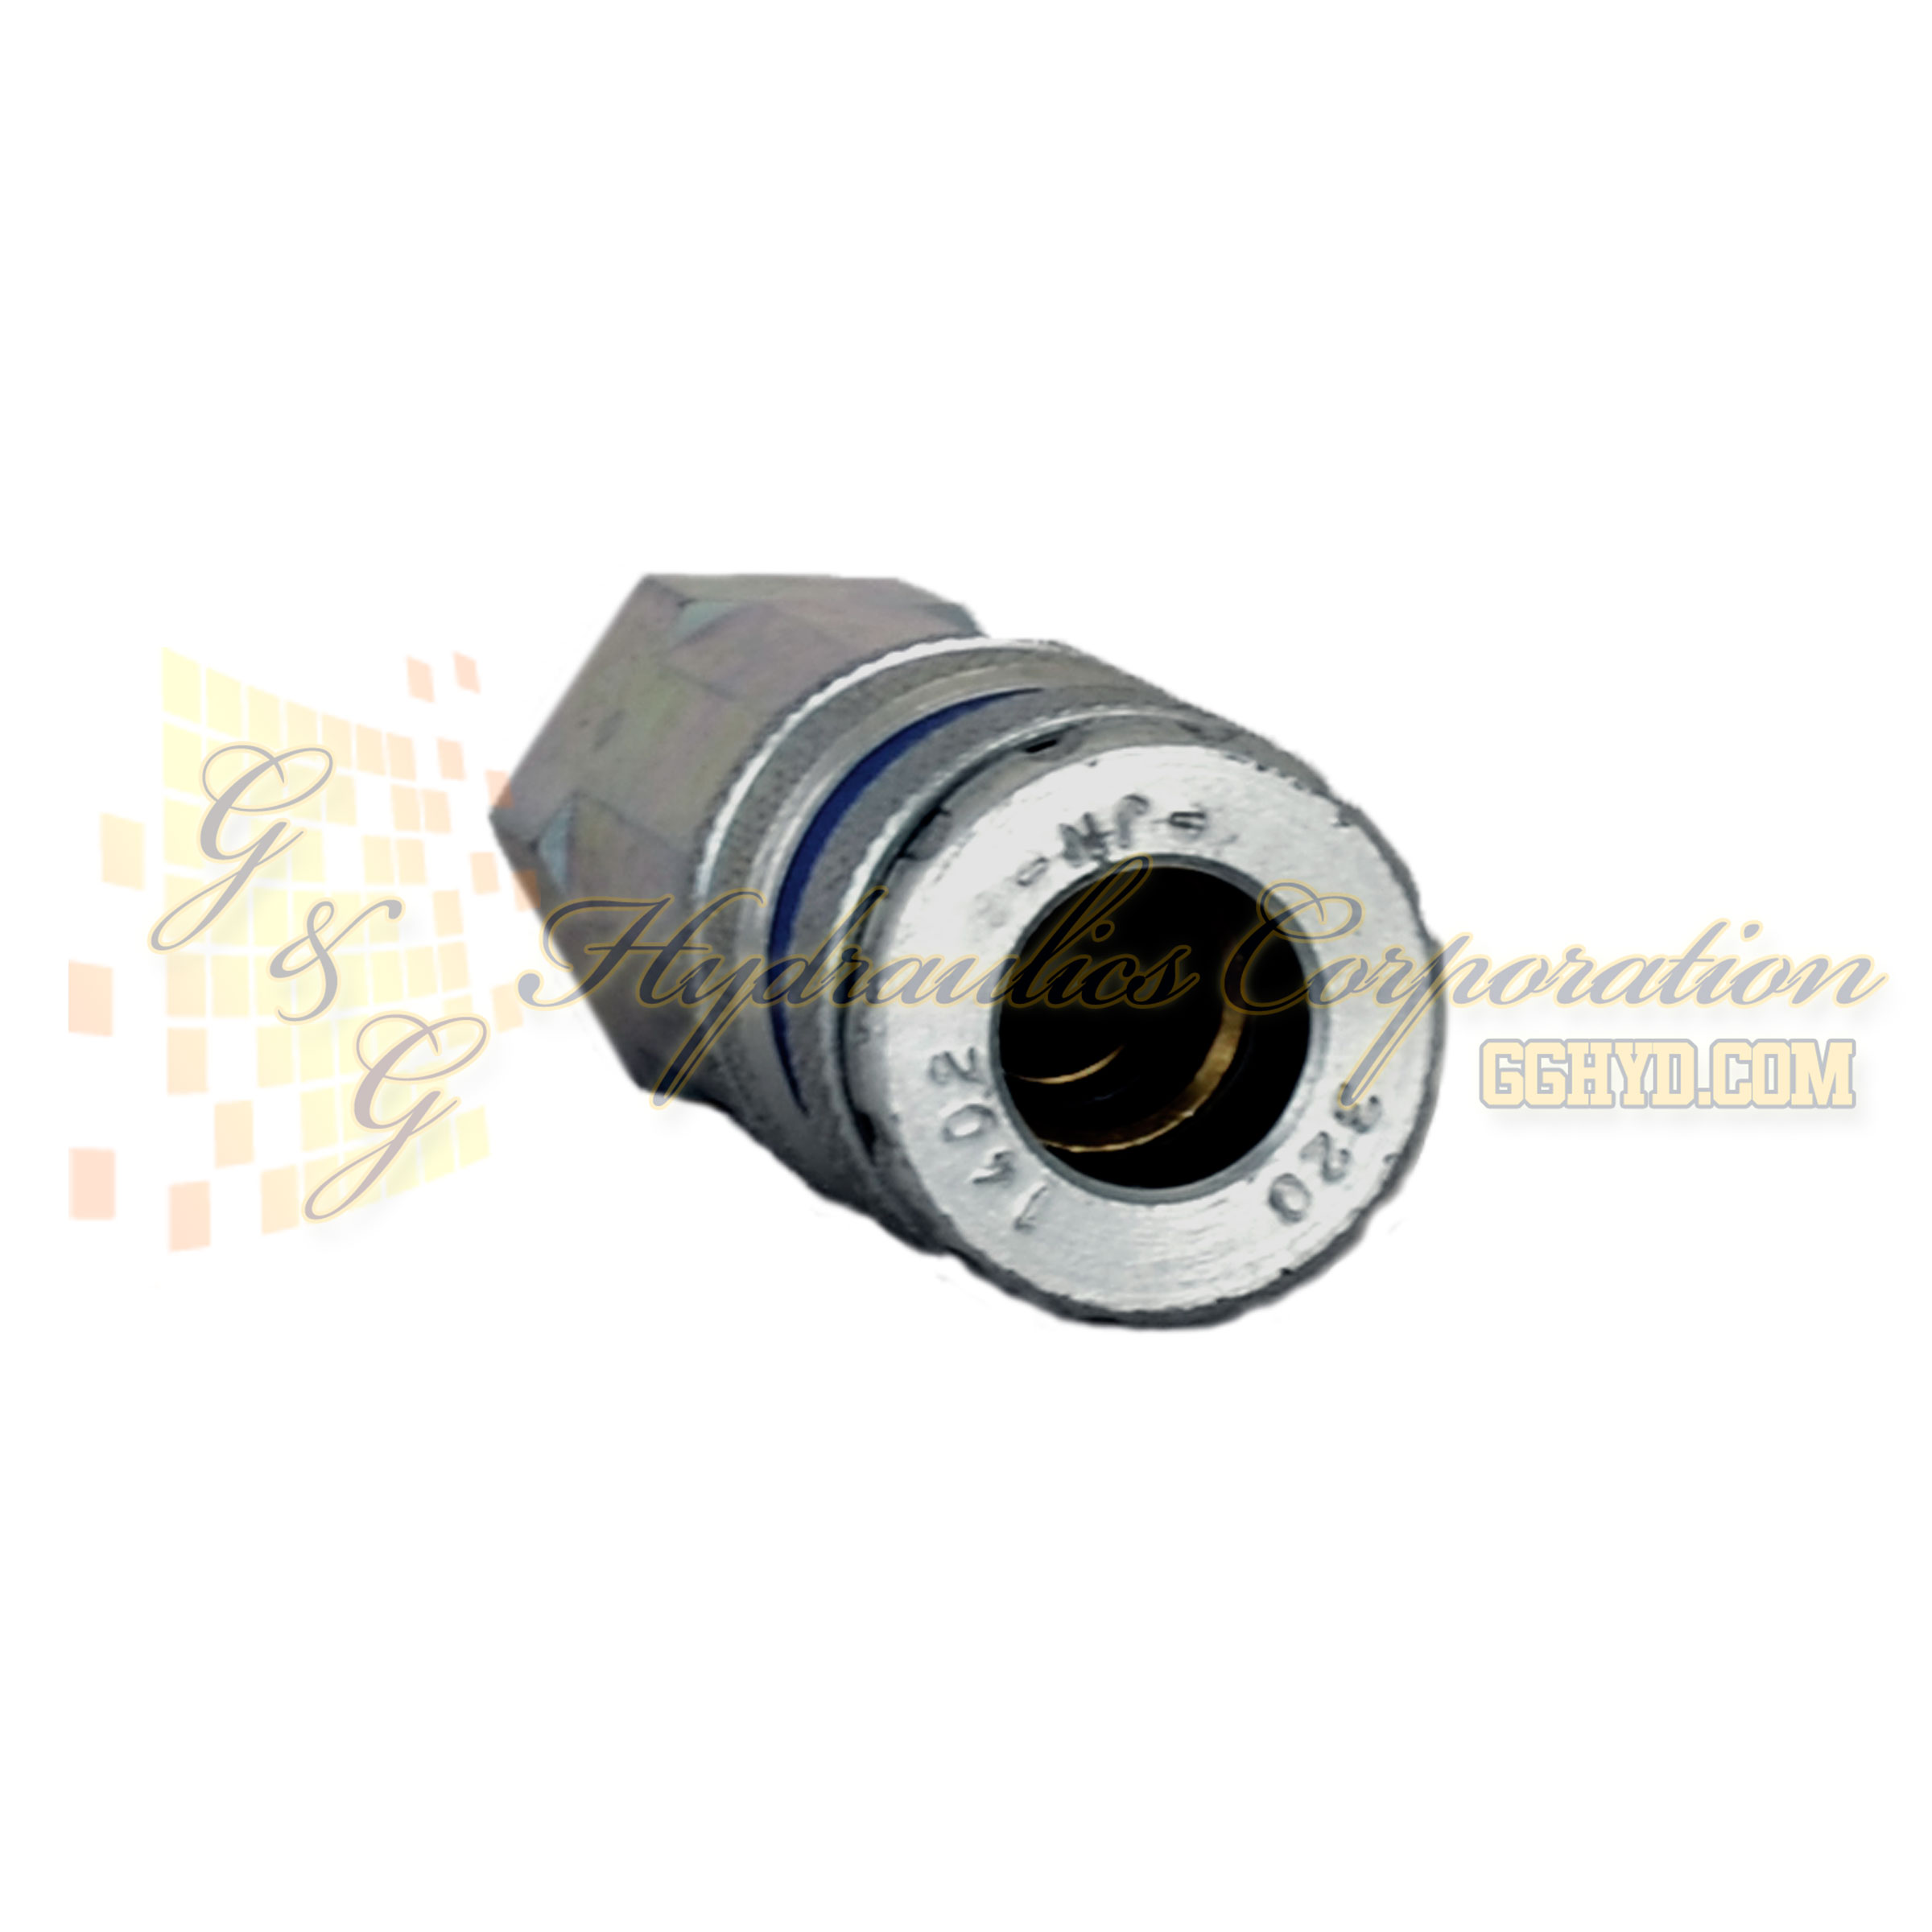 10-320-1402 CEJN Standard and Vented Safety Coupler, 1/4" NPT Female Threads